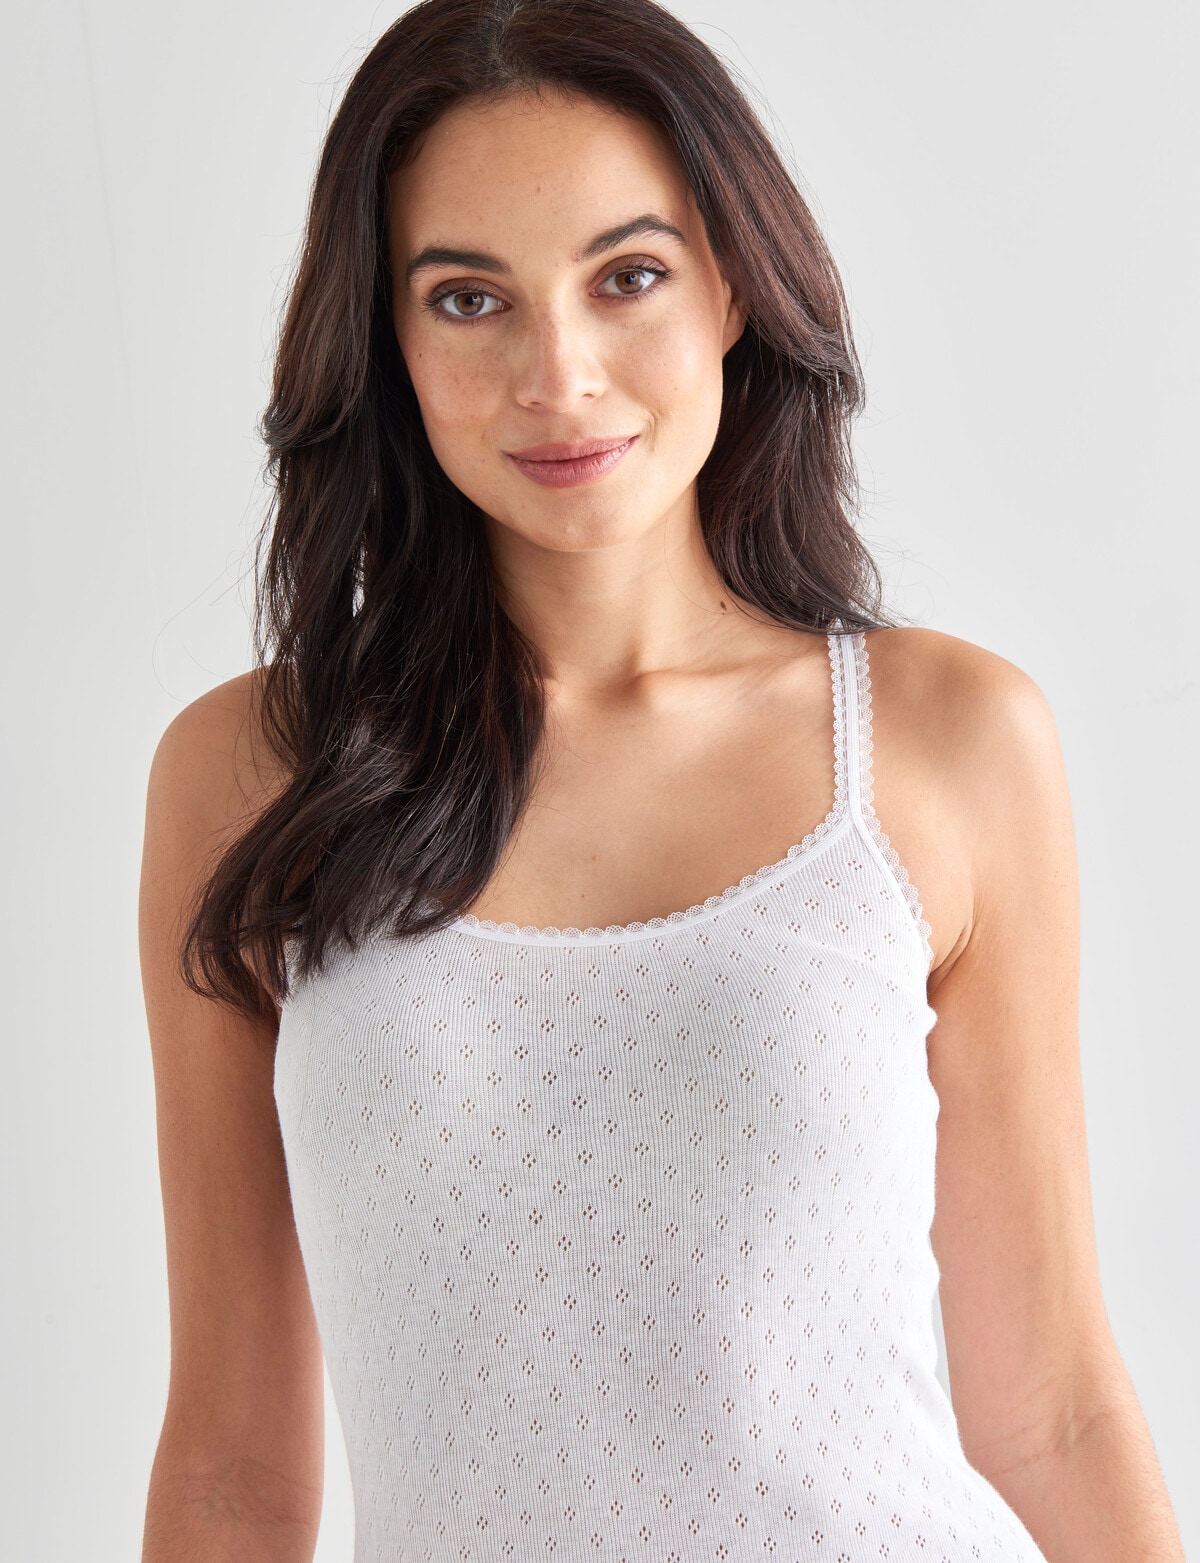 Womens Cami Tops  Women Camisoles & Tops – Nomad the Label